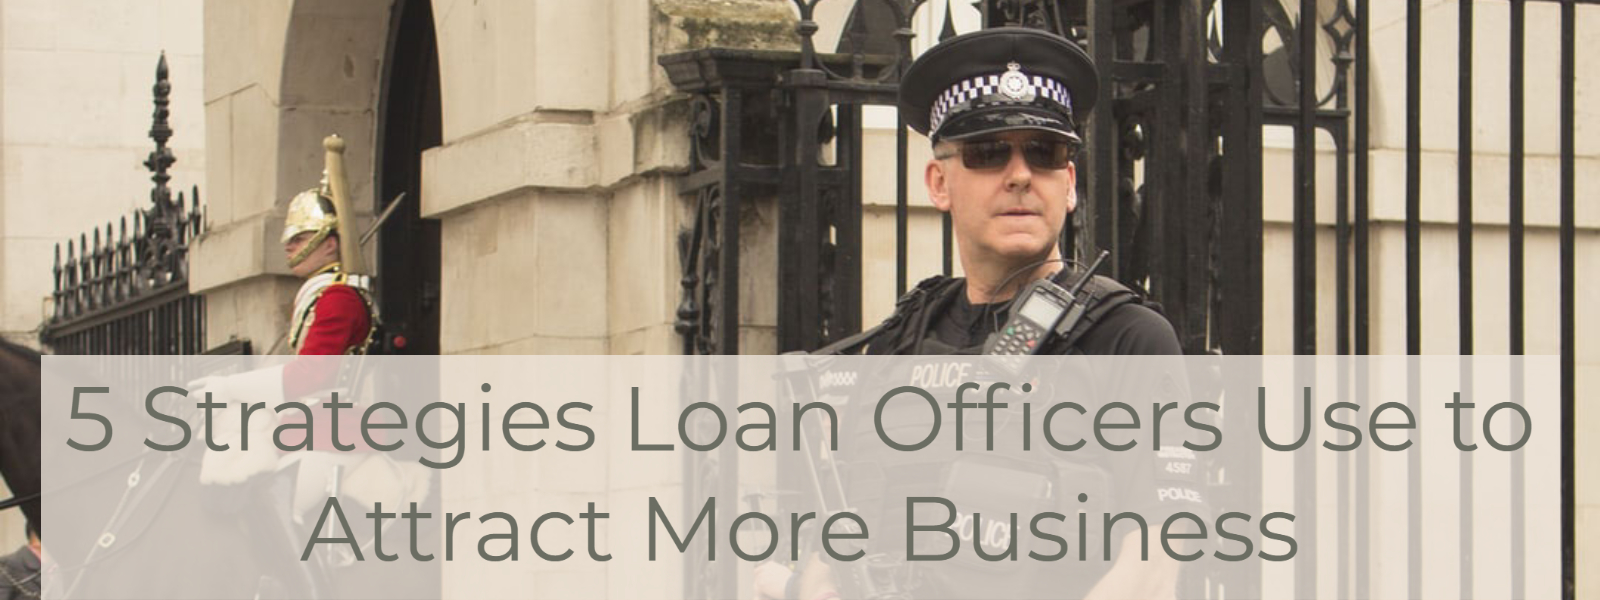 5 Strategies Loan Officers Use to Attract More Business